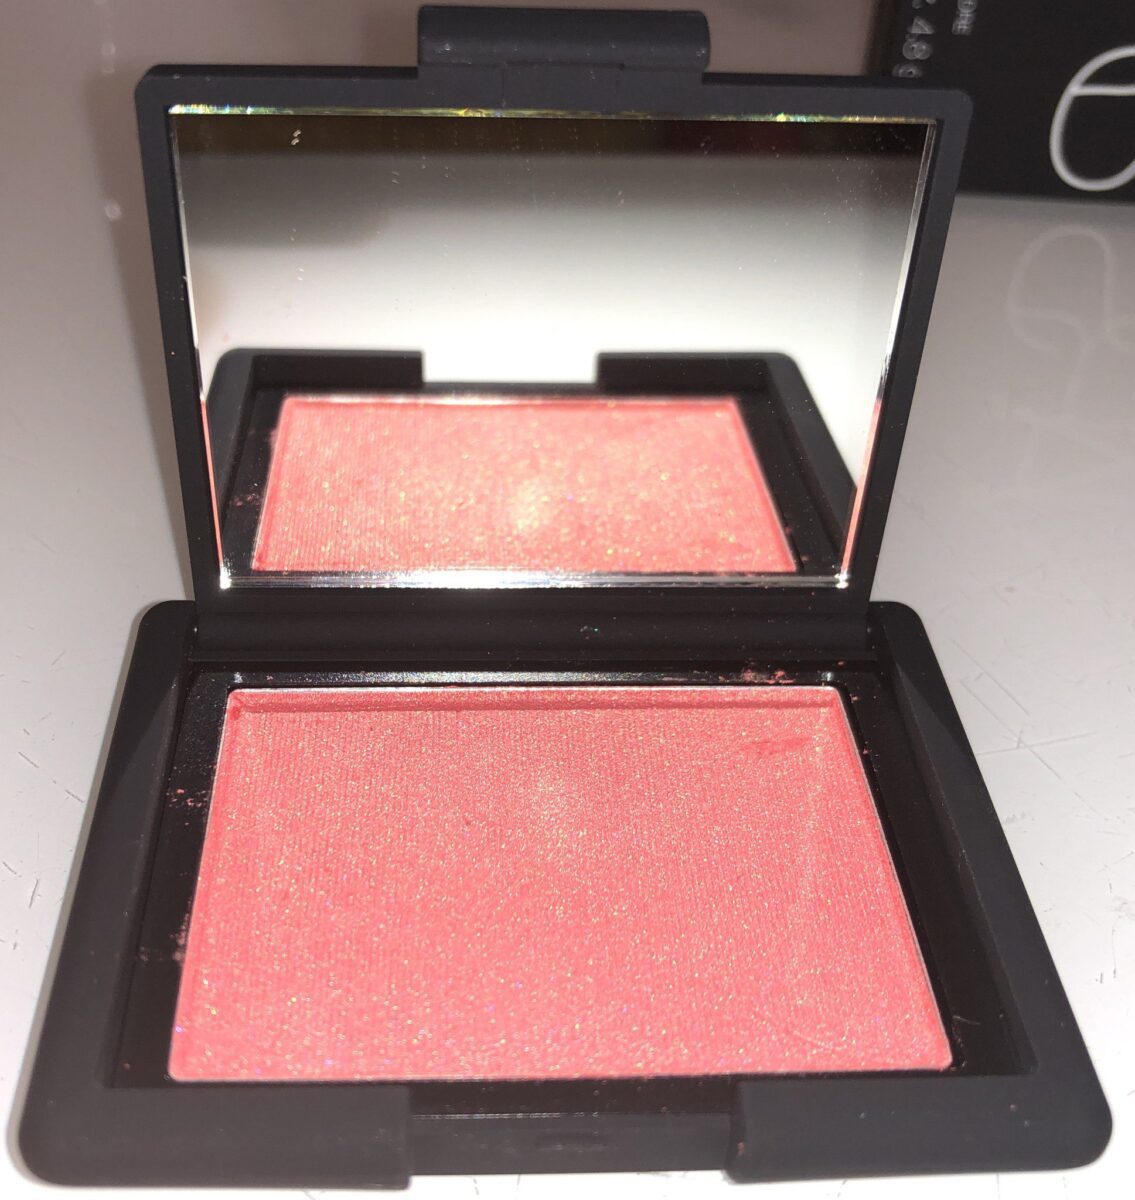 INSIDE THE NARS ICONIC BLUSH TEN NEW SHADES PALETTE